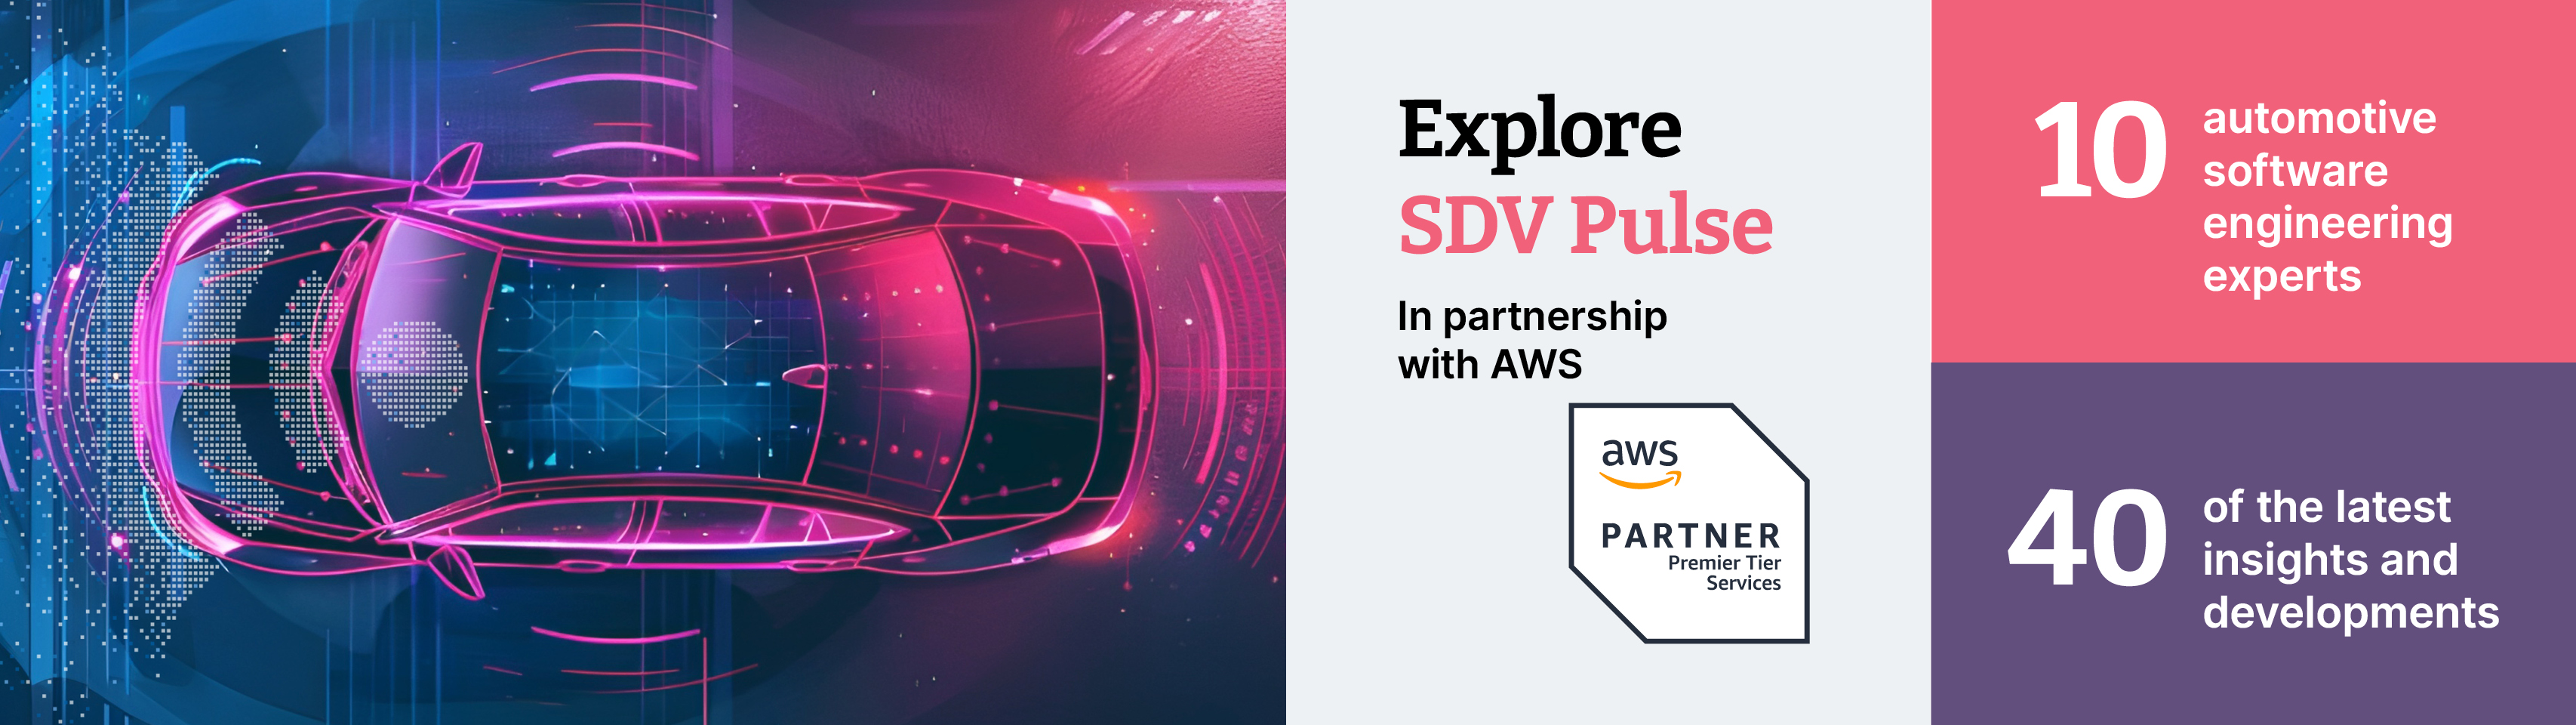 SDV pulse report in partnership with AWS